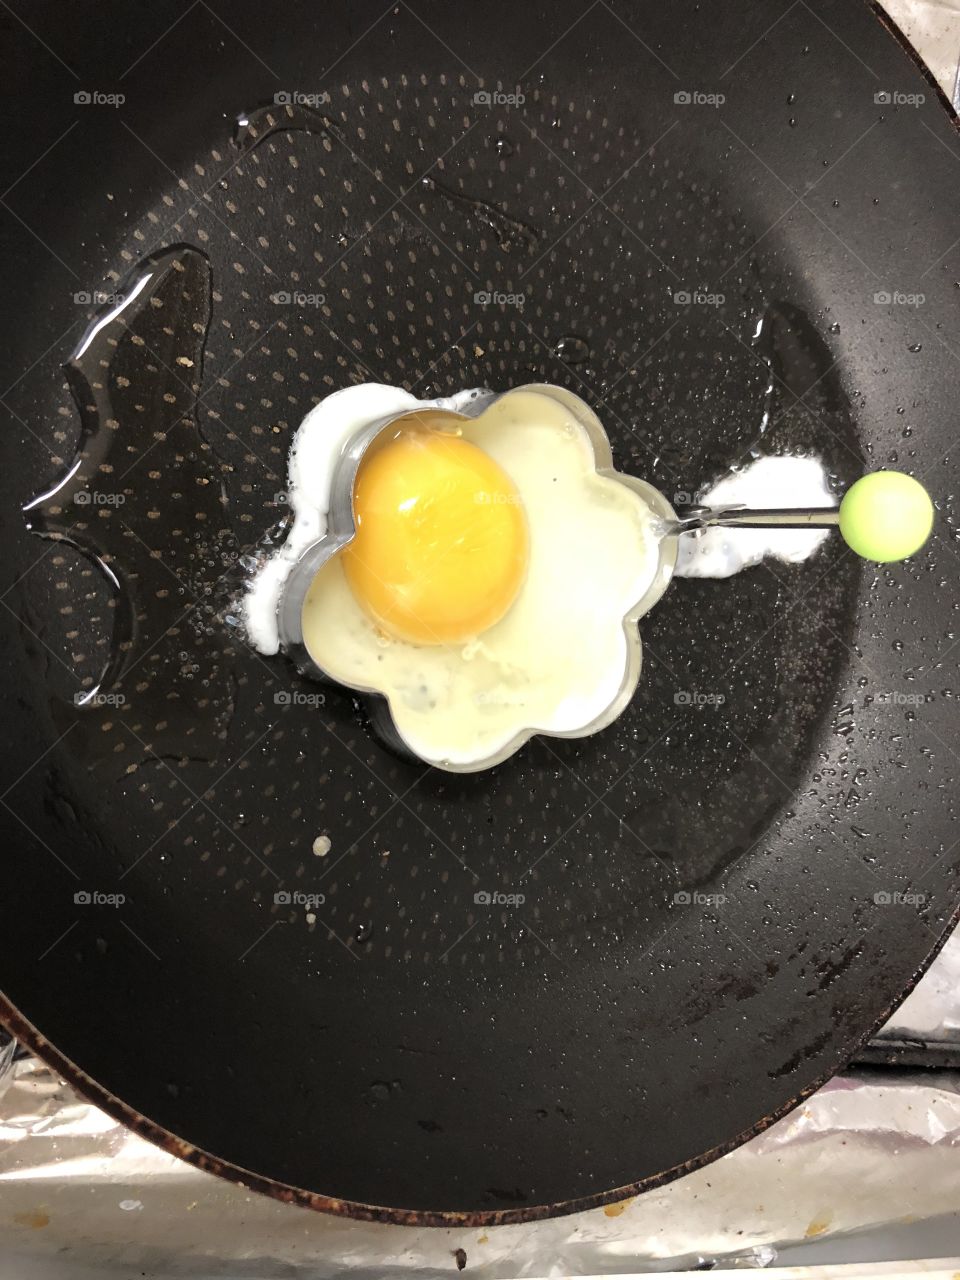 Egg fried with yellow yolk.